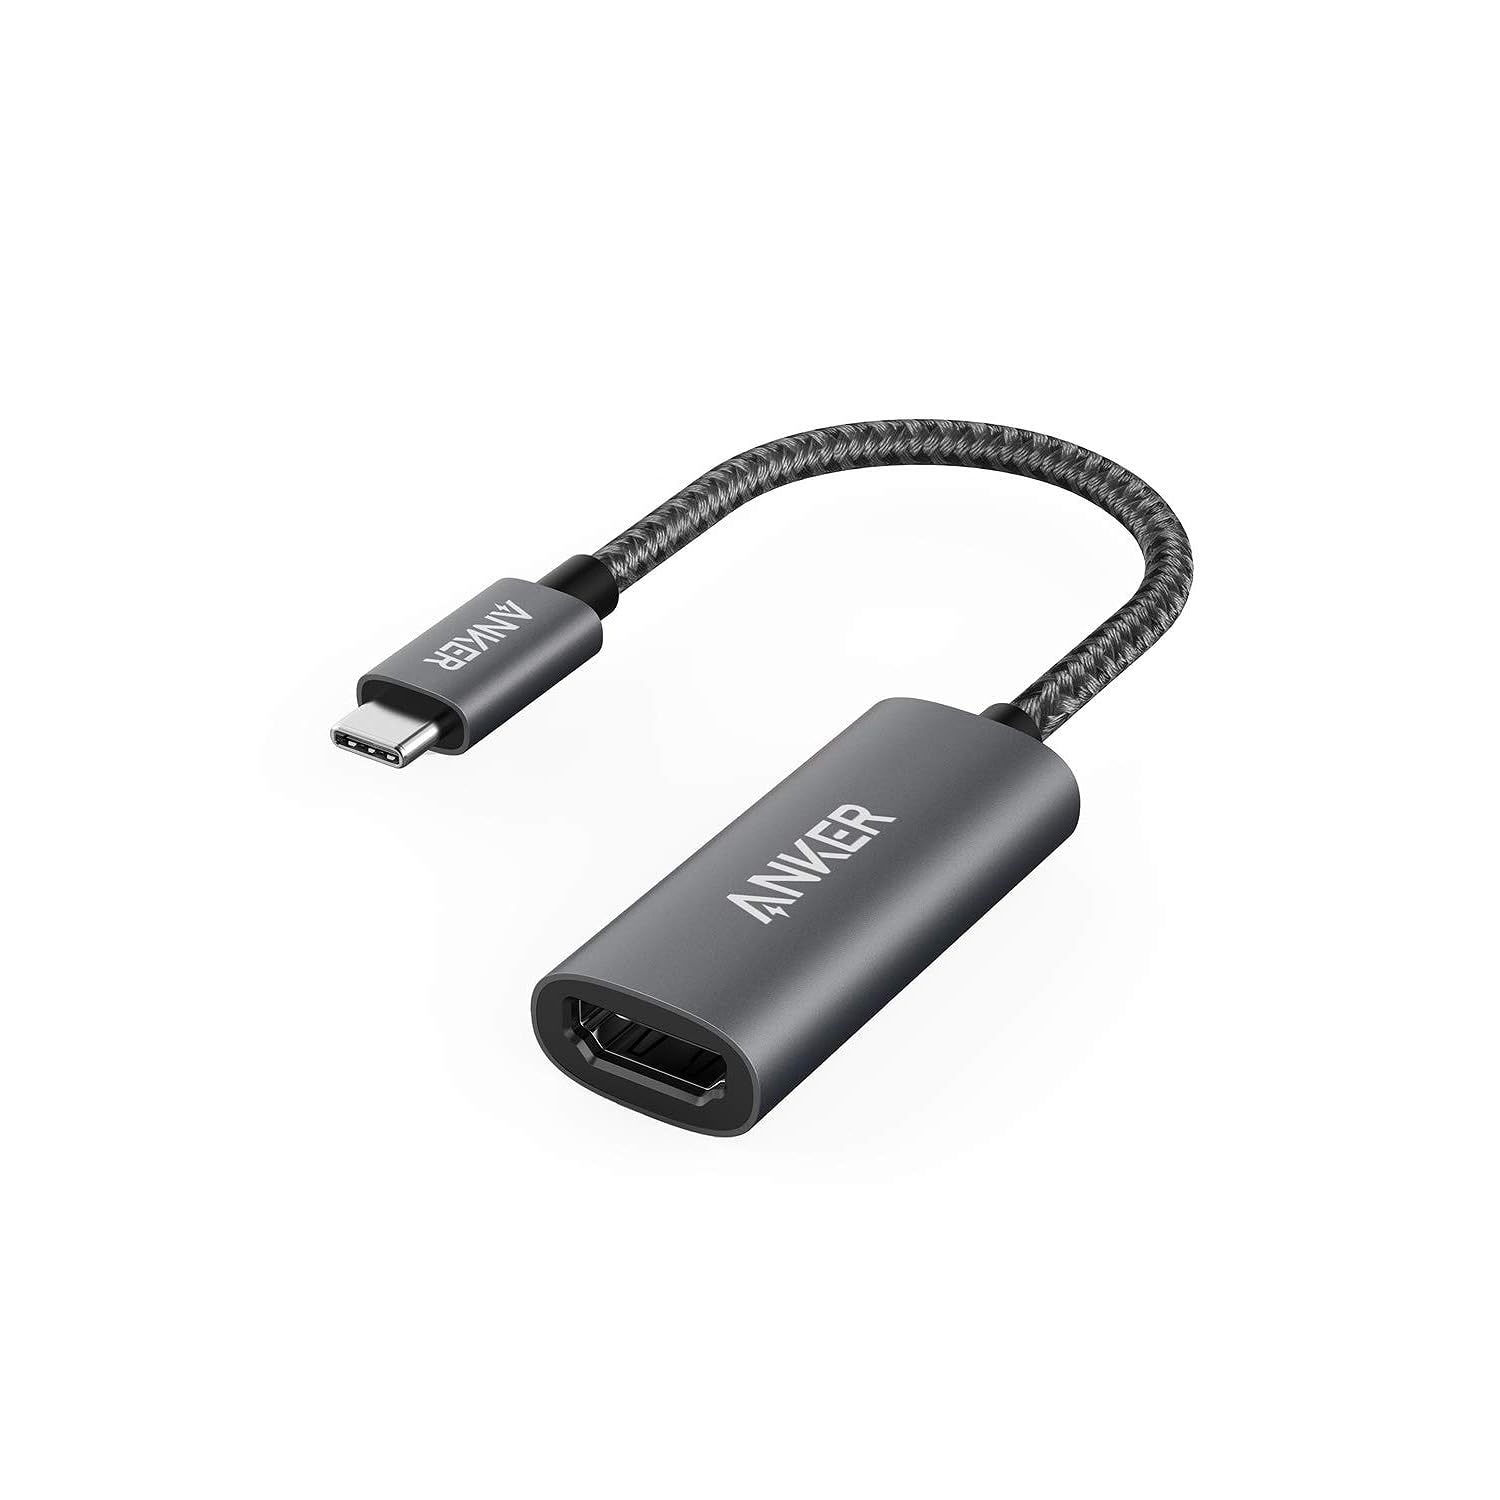 Primary image for Anker USB C to HDMI Adapter (4K@60Hz), 310 USB-C Adapter (4K HDMI), Aluminum, Po